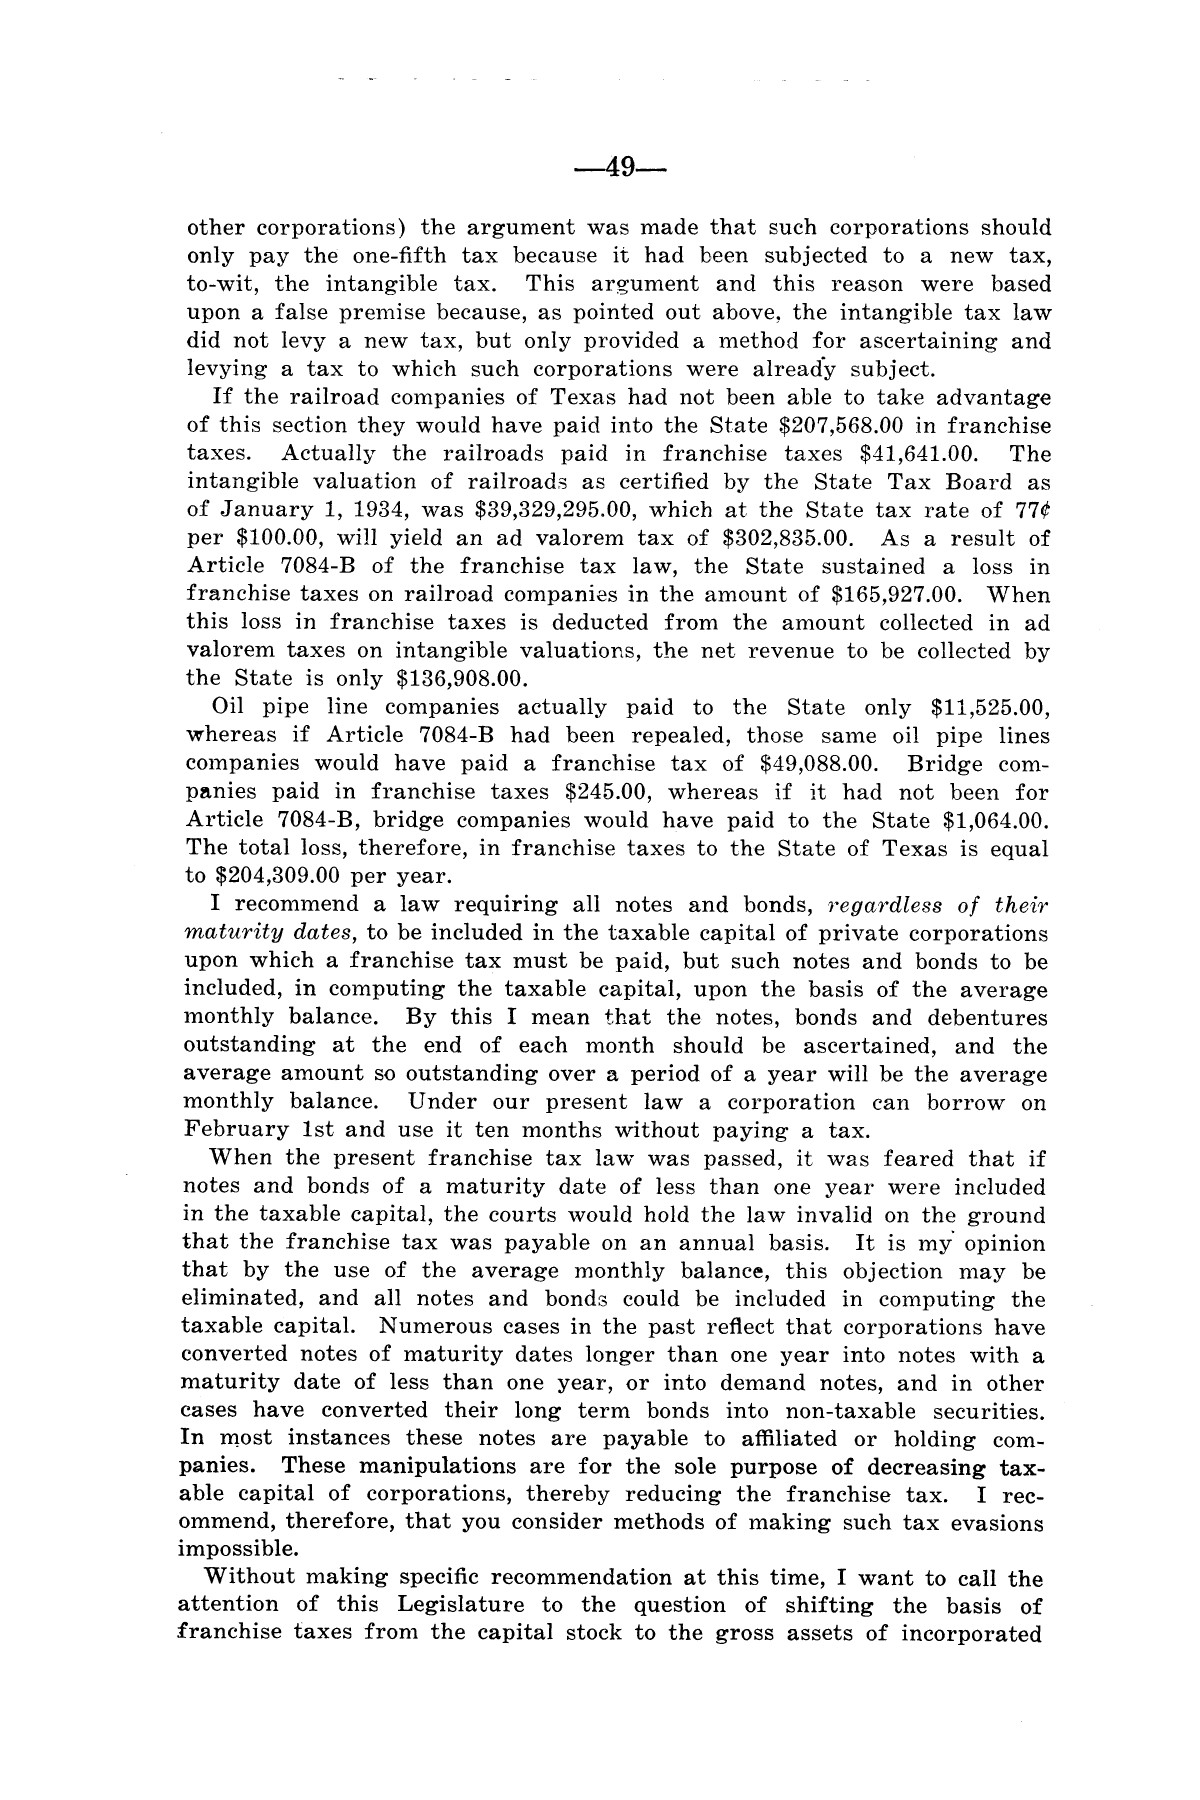 Legislative Messages of Hon. James V. Allred, Governor of Texas 1935-1939
                                                
                                                    [Sequence #]: 48 of 263
                                                